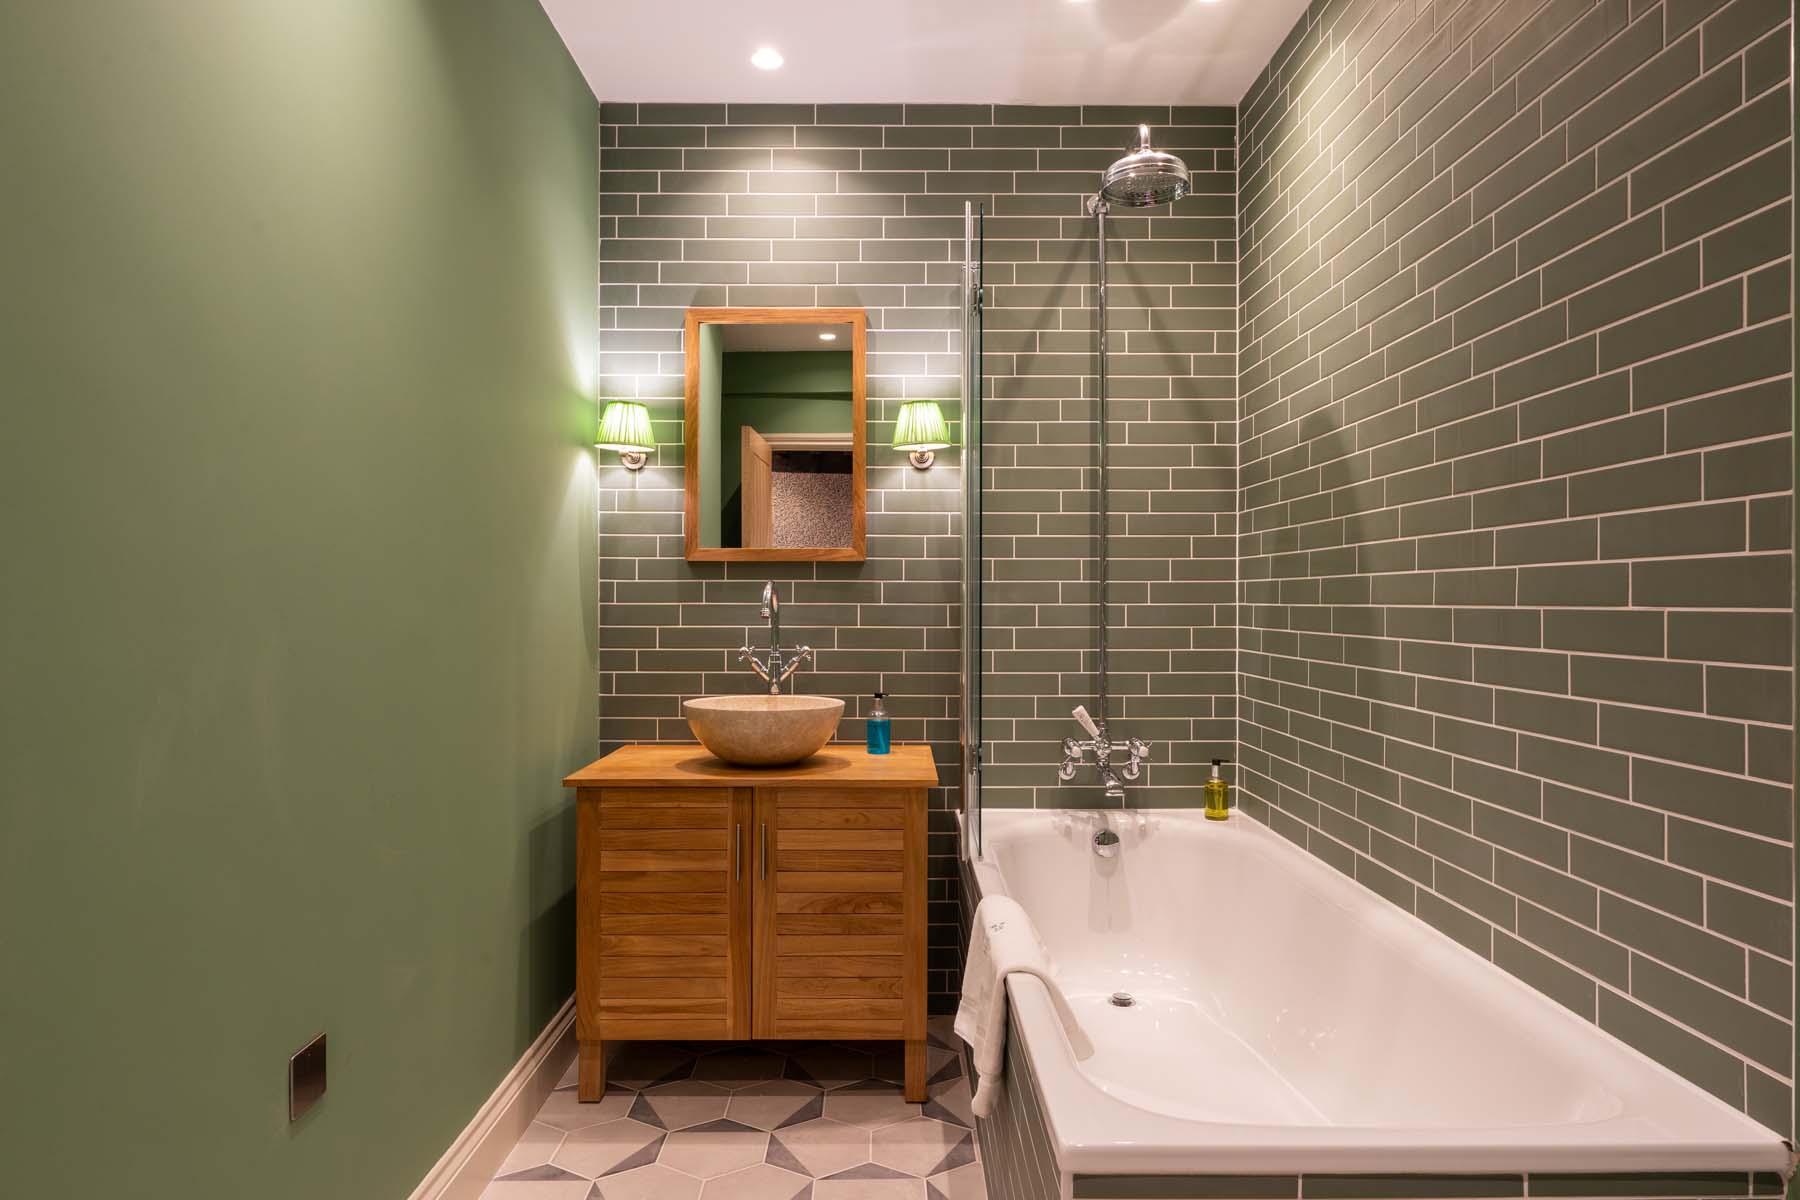 Bathroom with green tiles and bath/shower